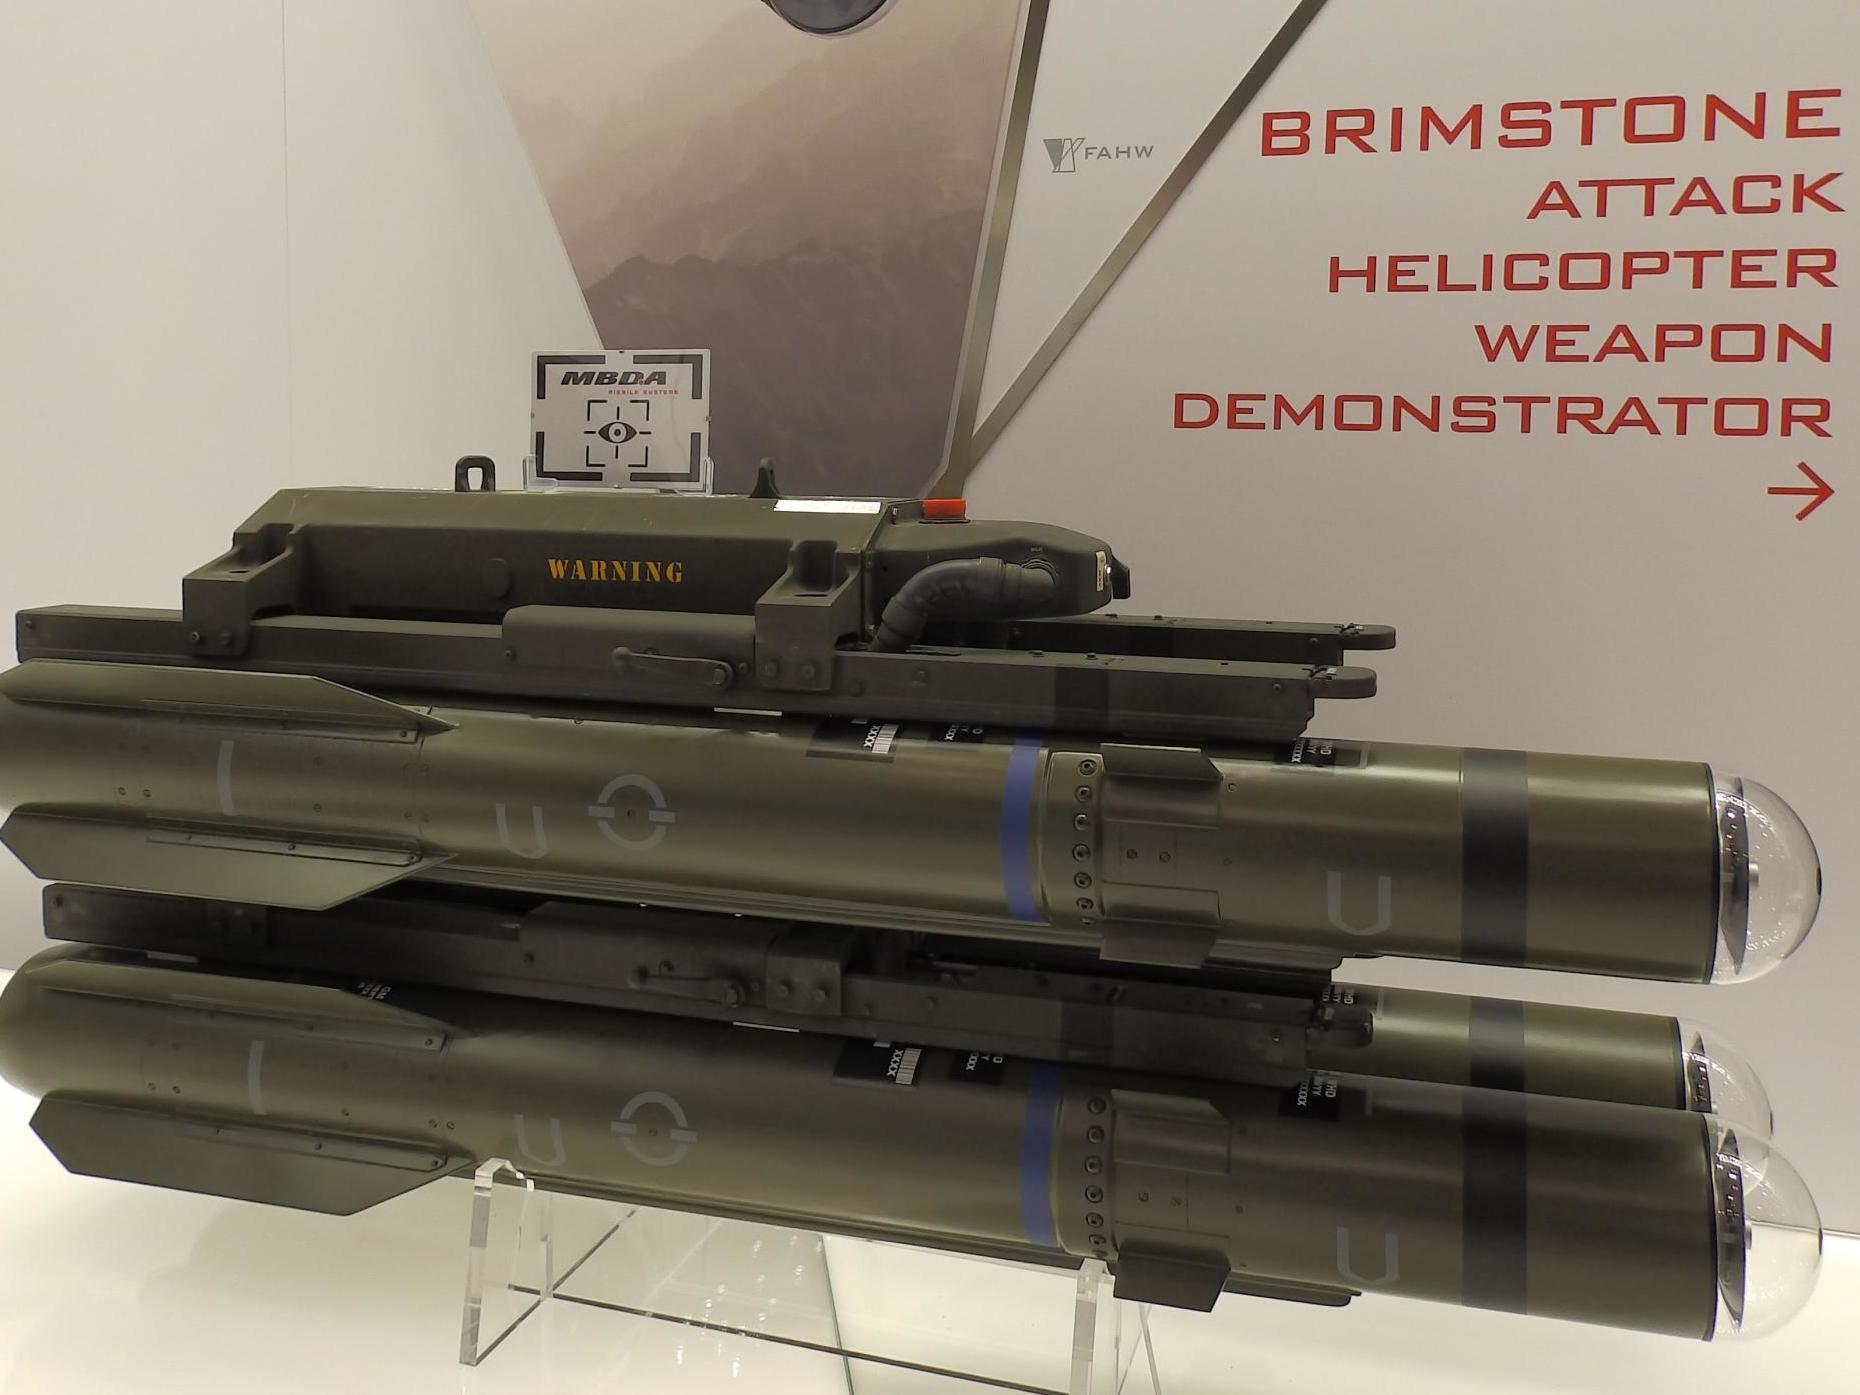 A helicopter weapon on display at the DSEI arms fair in London on 13 September